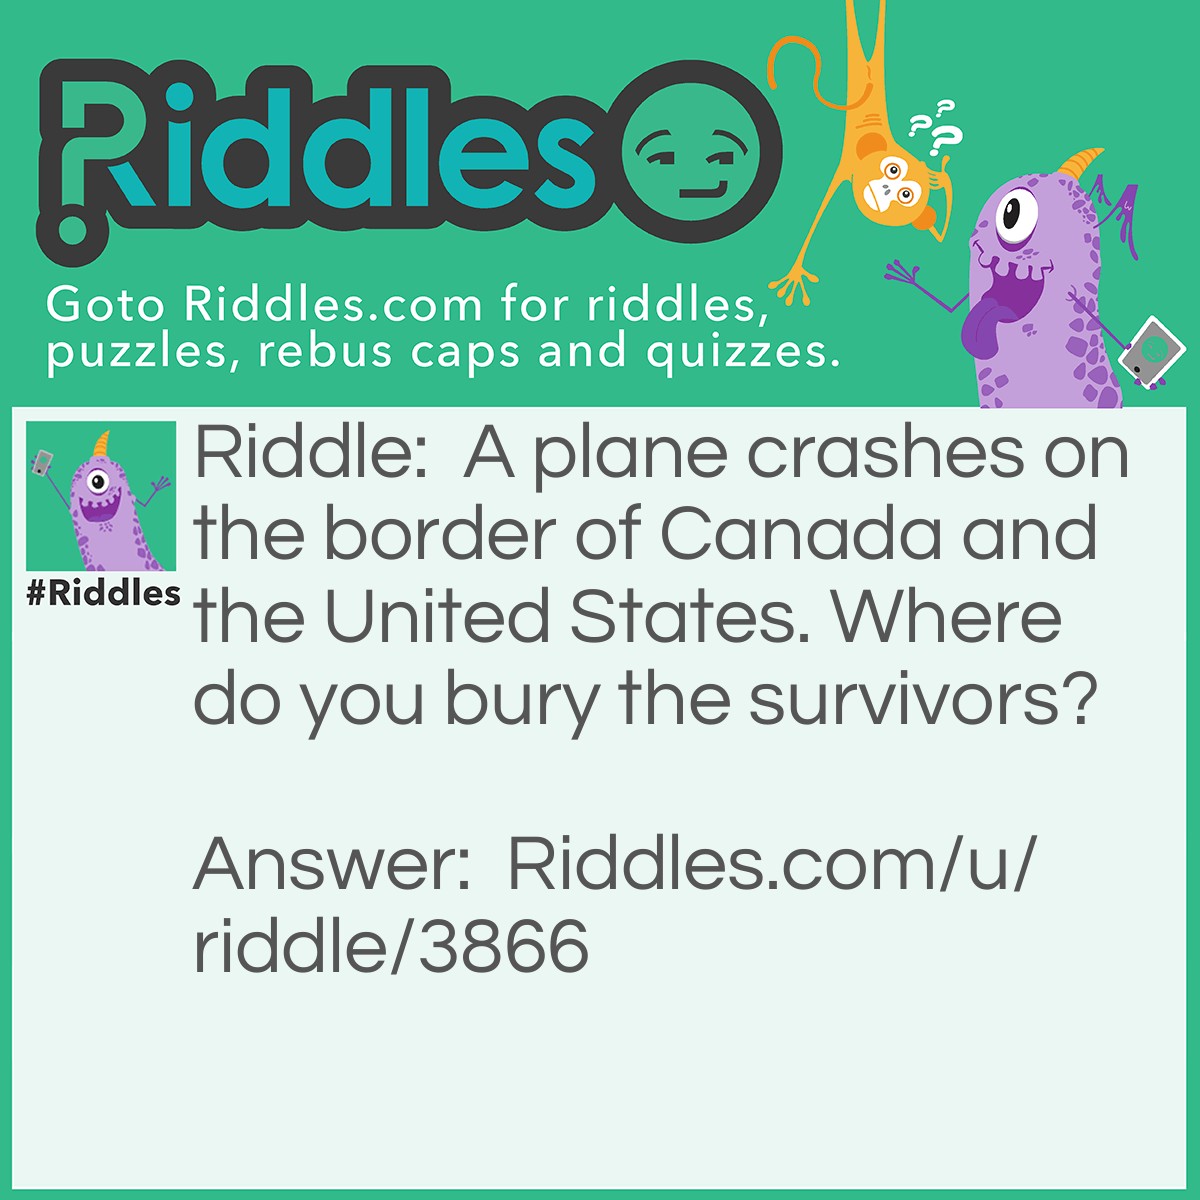 Riddle: A plane crashes on the border of Canada and the United States. Where do you bury the survivors? Answer: You don't bury the survivors.